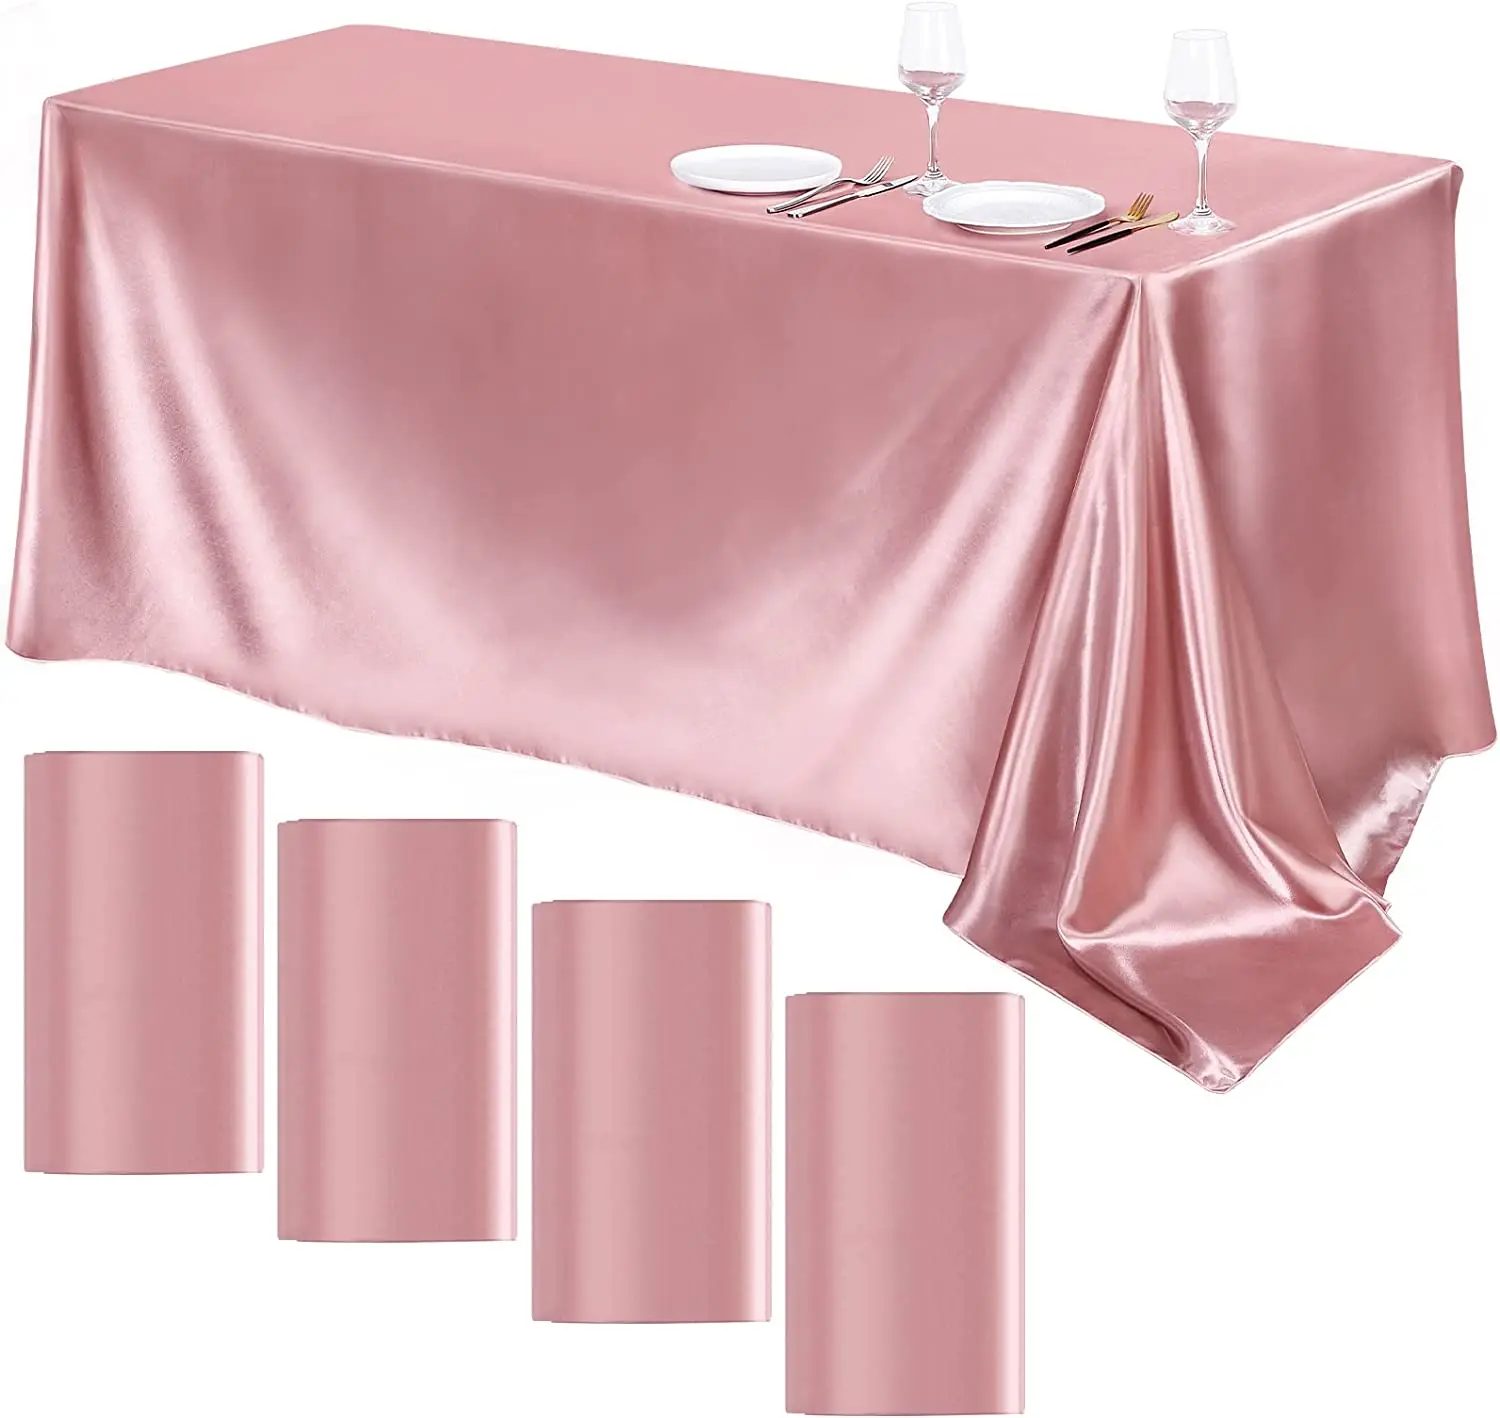 

57x102inch Bright Smooth Silk Table Cover for Wedding Banquet Anniversary Dining Table Decor Rectangle Wedding Satin Tablecloth